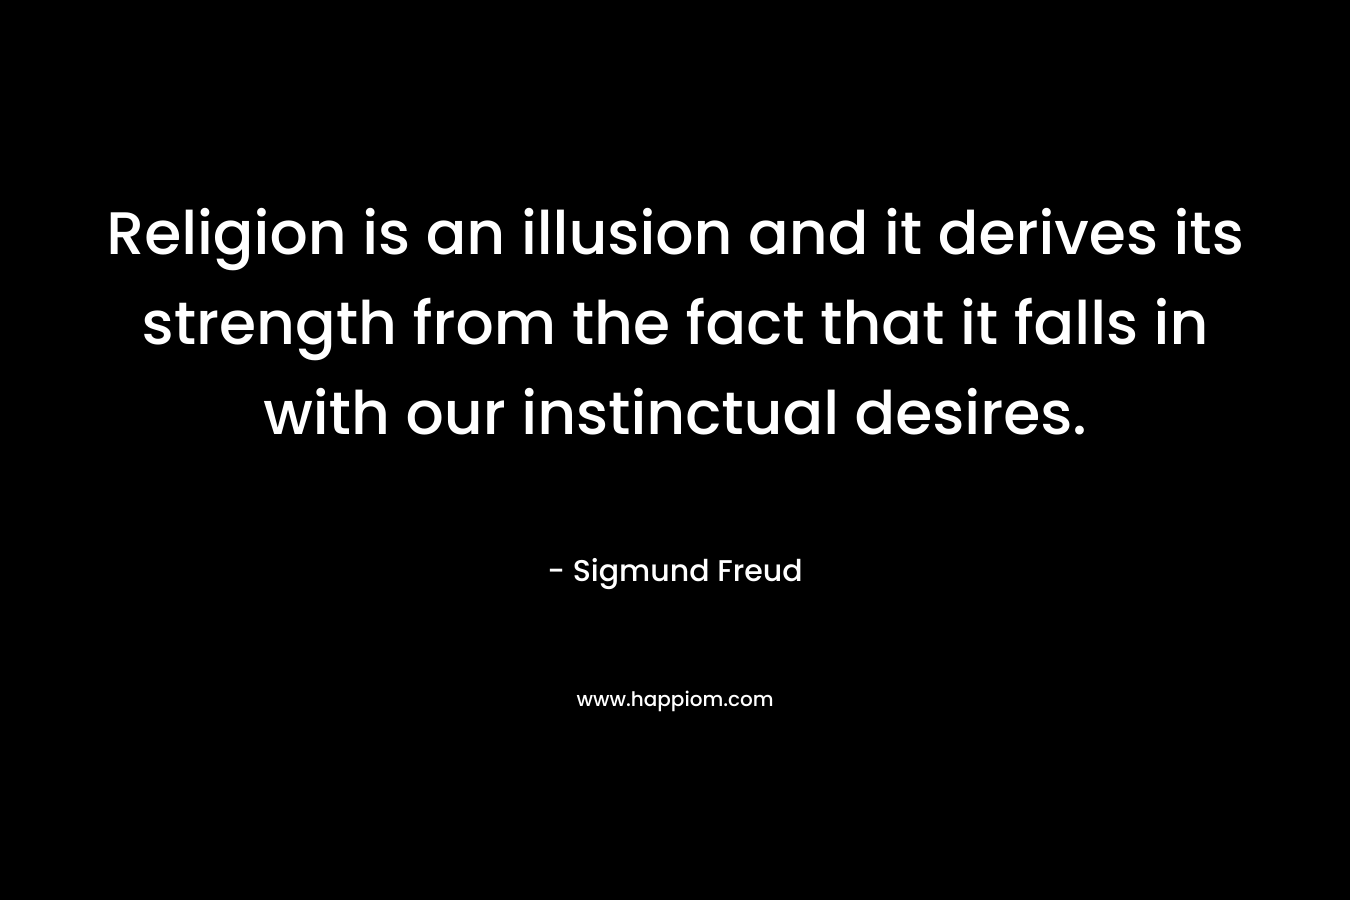 Religion is an illusion and it derives its strength from the fact that it falls in with our instinctual desires.